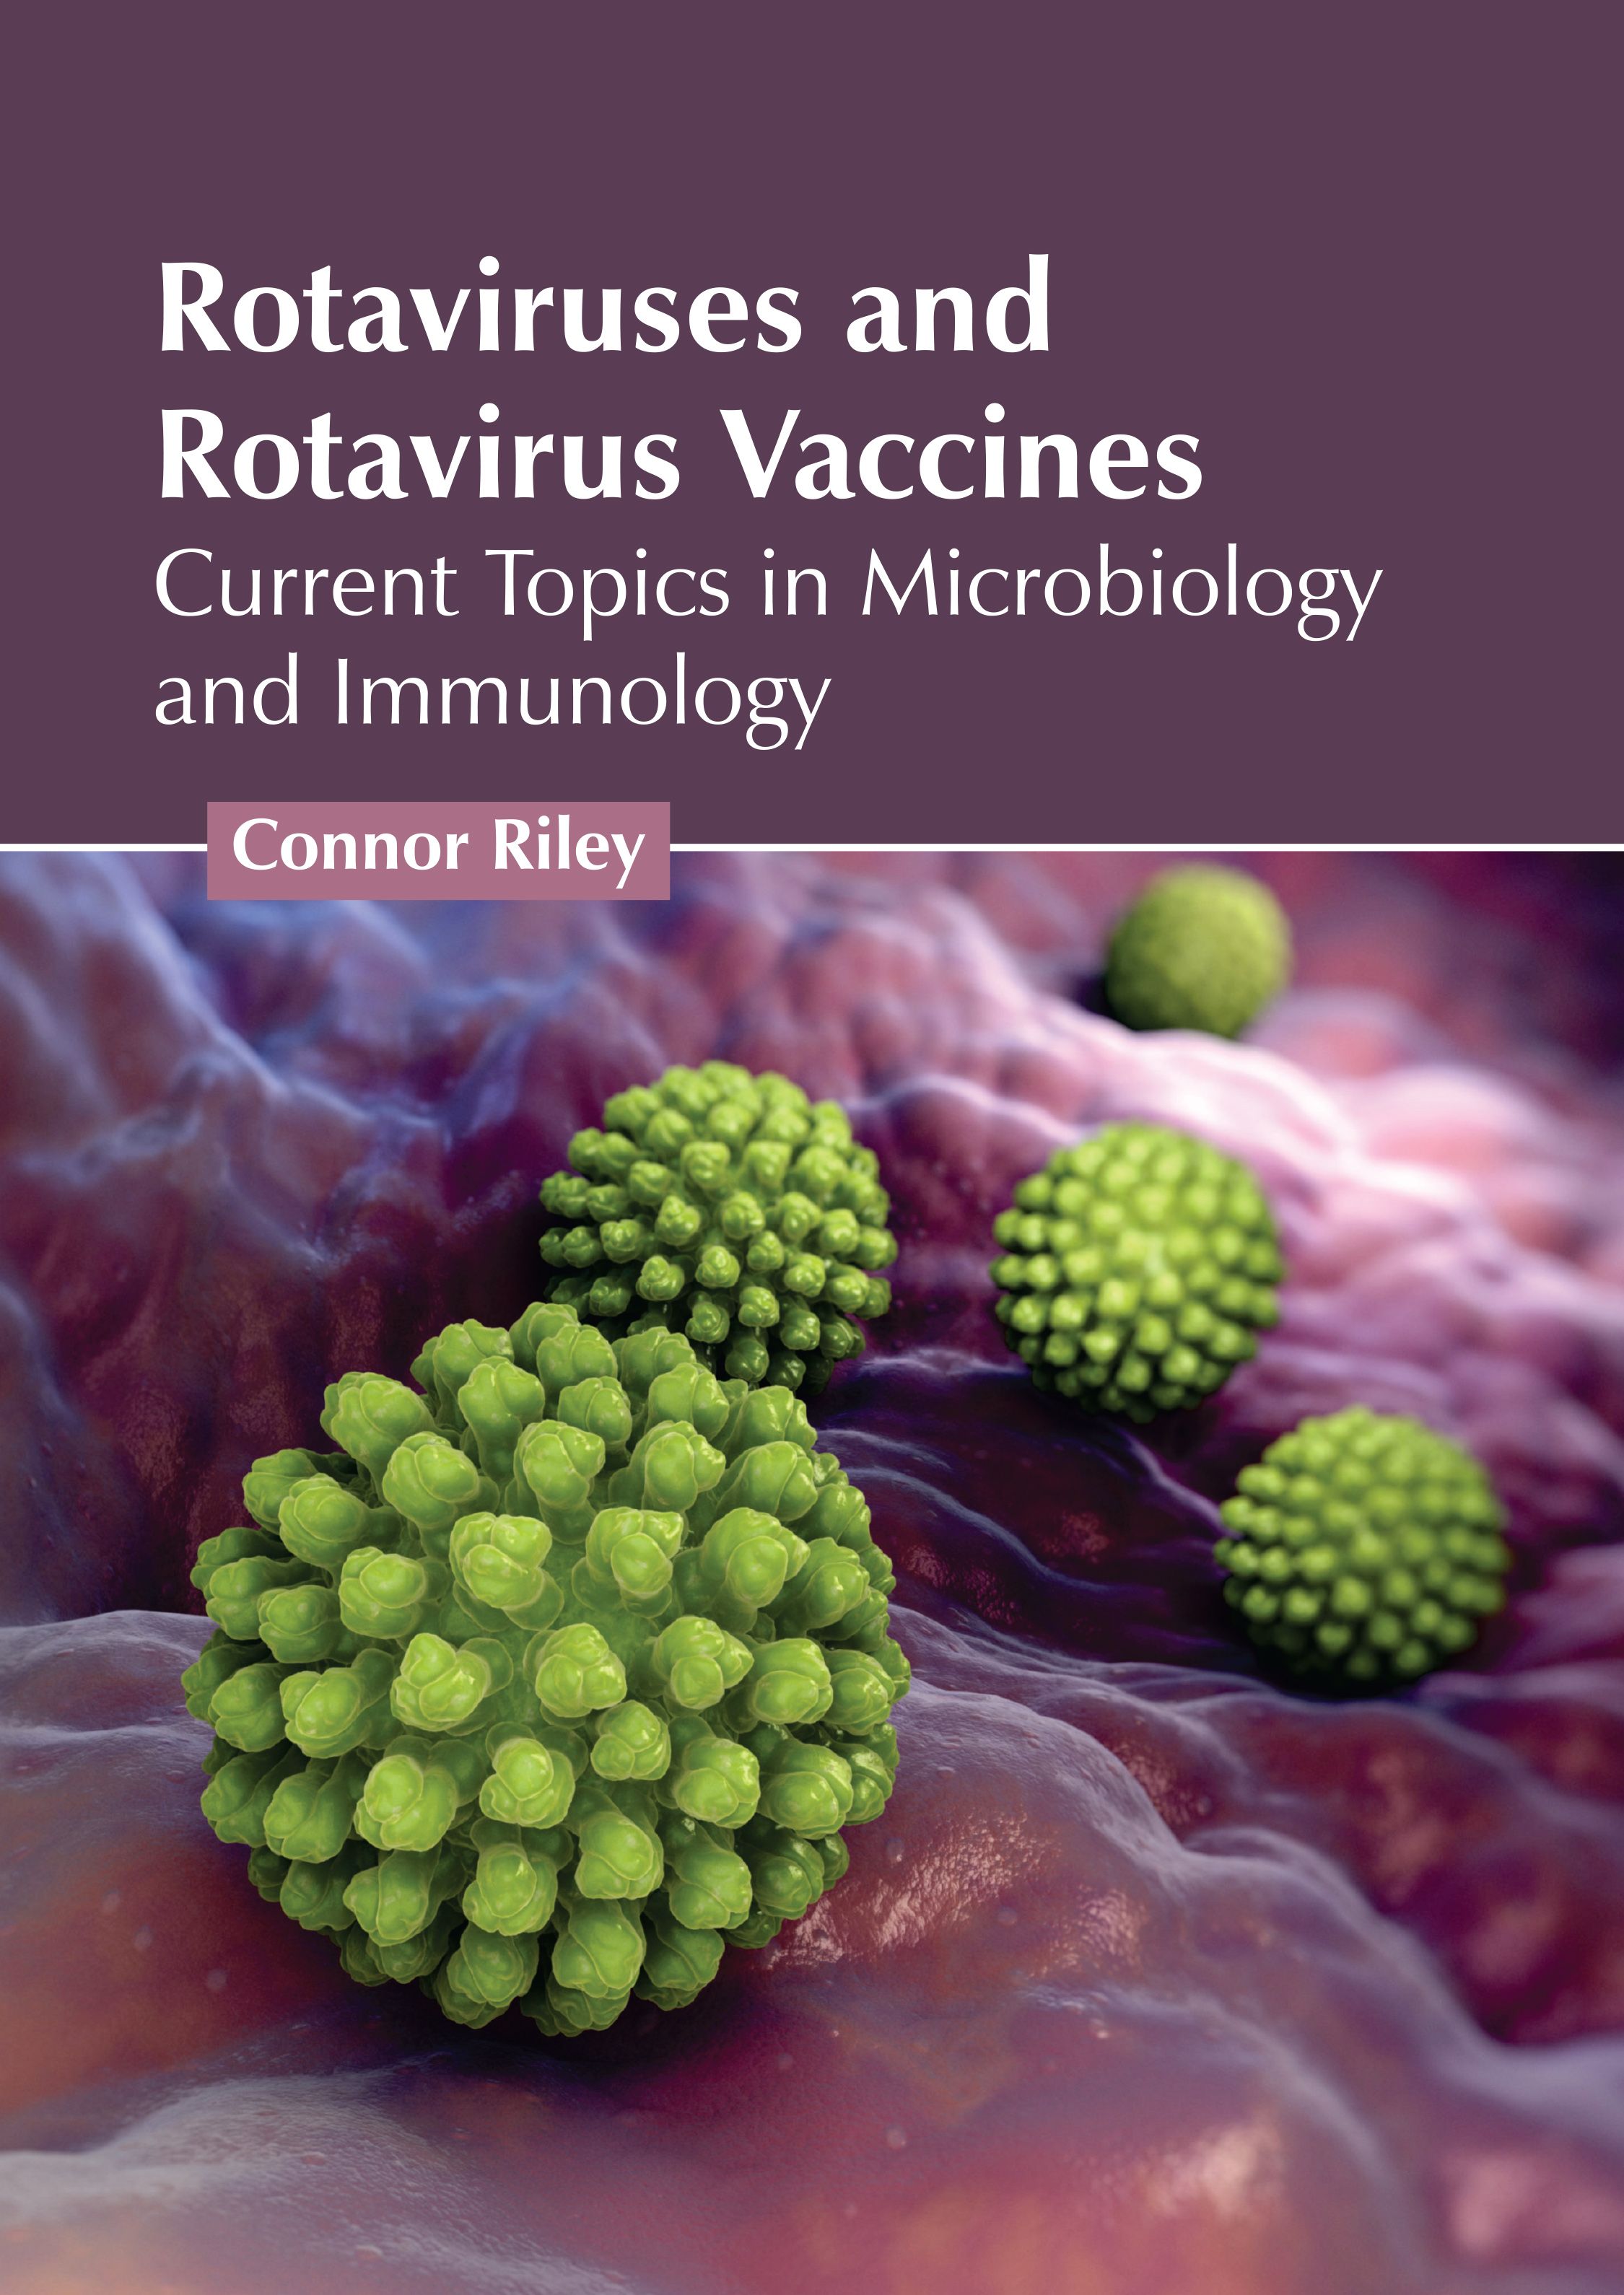 ROTAVIRUSES AND ROTAVIRUS VACCINES: CURRENT TOPICS IN MICROBIOLOGY AND IMMUNOLOGY